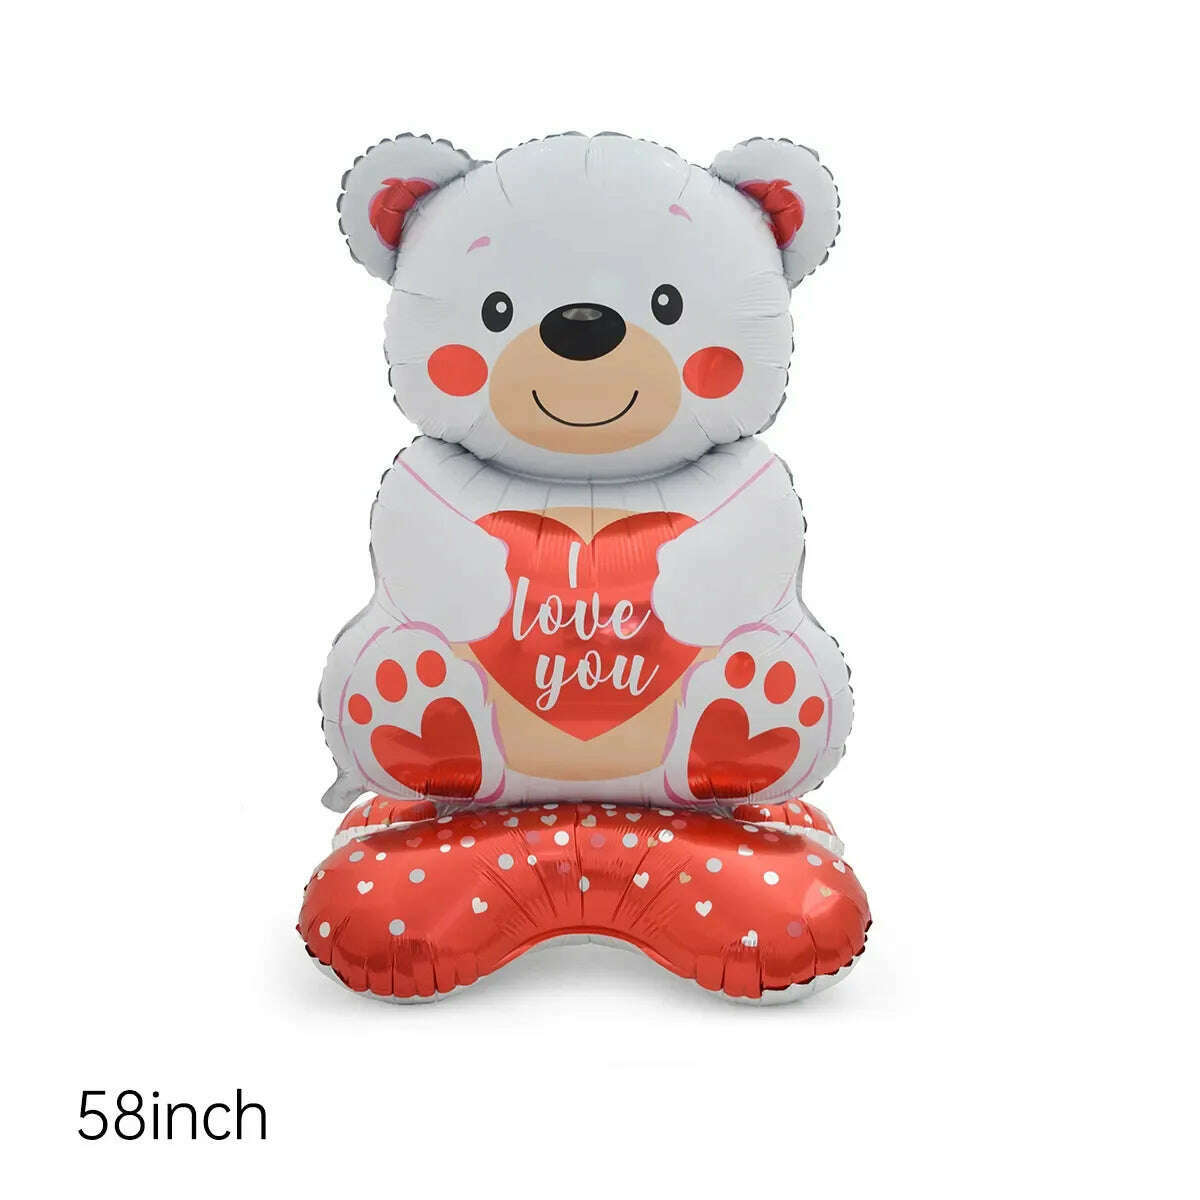 100cm Teddy Bear Standing Balloon Valentine Banner For Valentine's Day Decorations I Love You Foil Balloon, plum / as picture, KIMLUD Women's Clothes